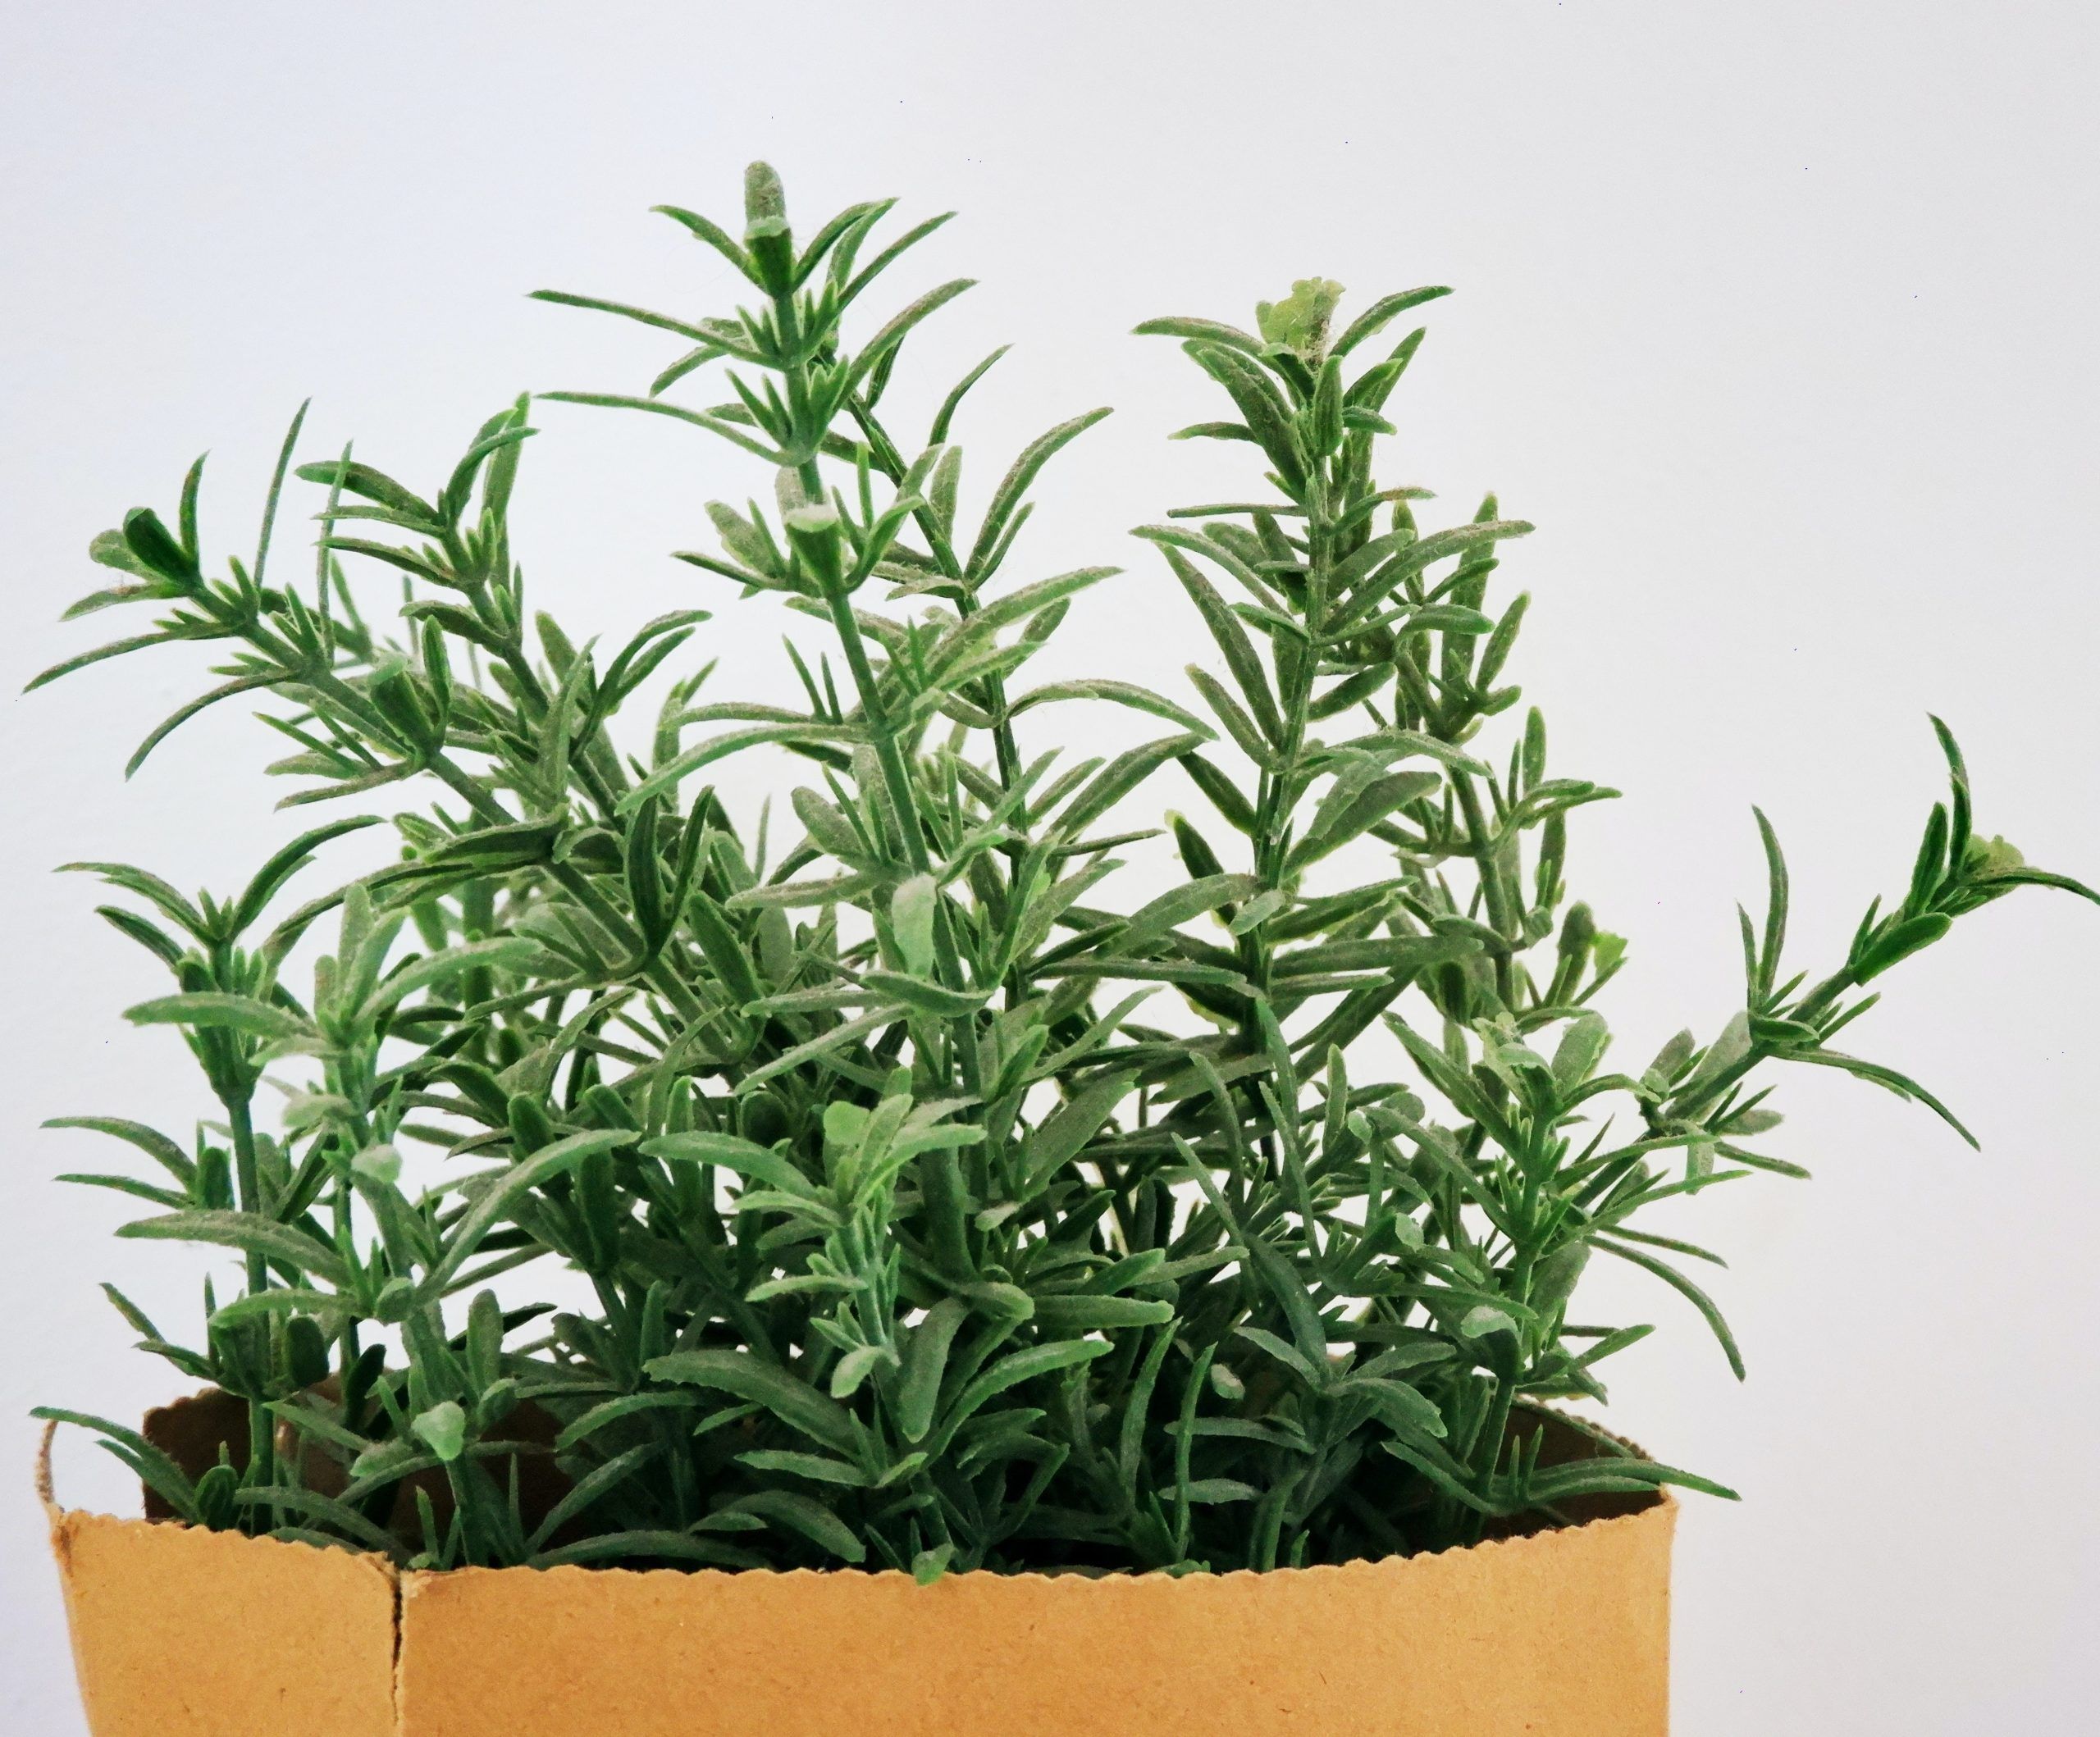 Does rosemary oil really support hair growth?